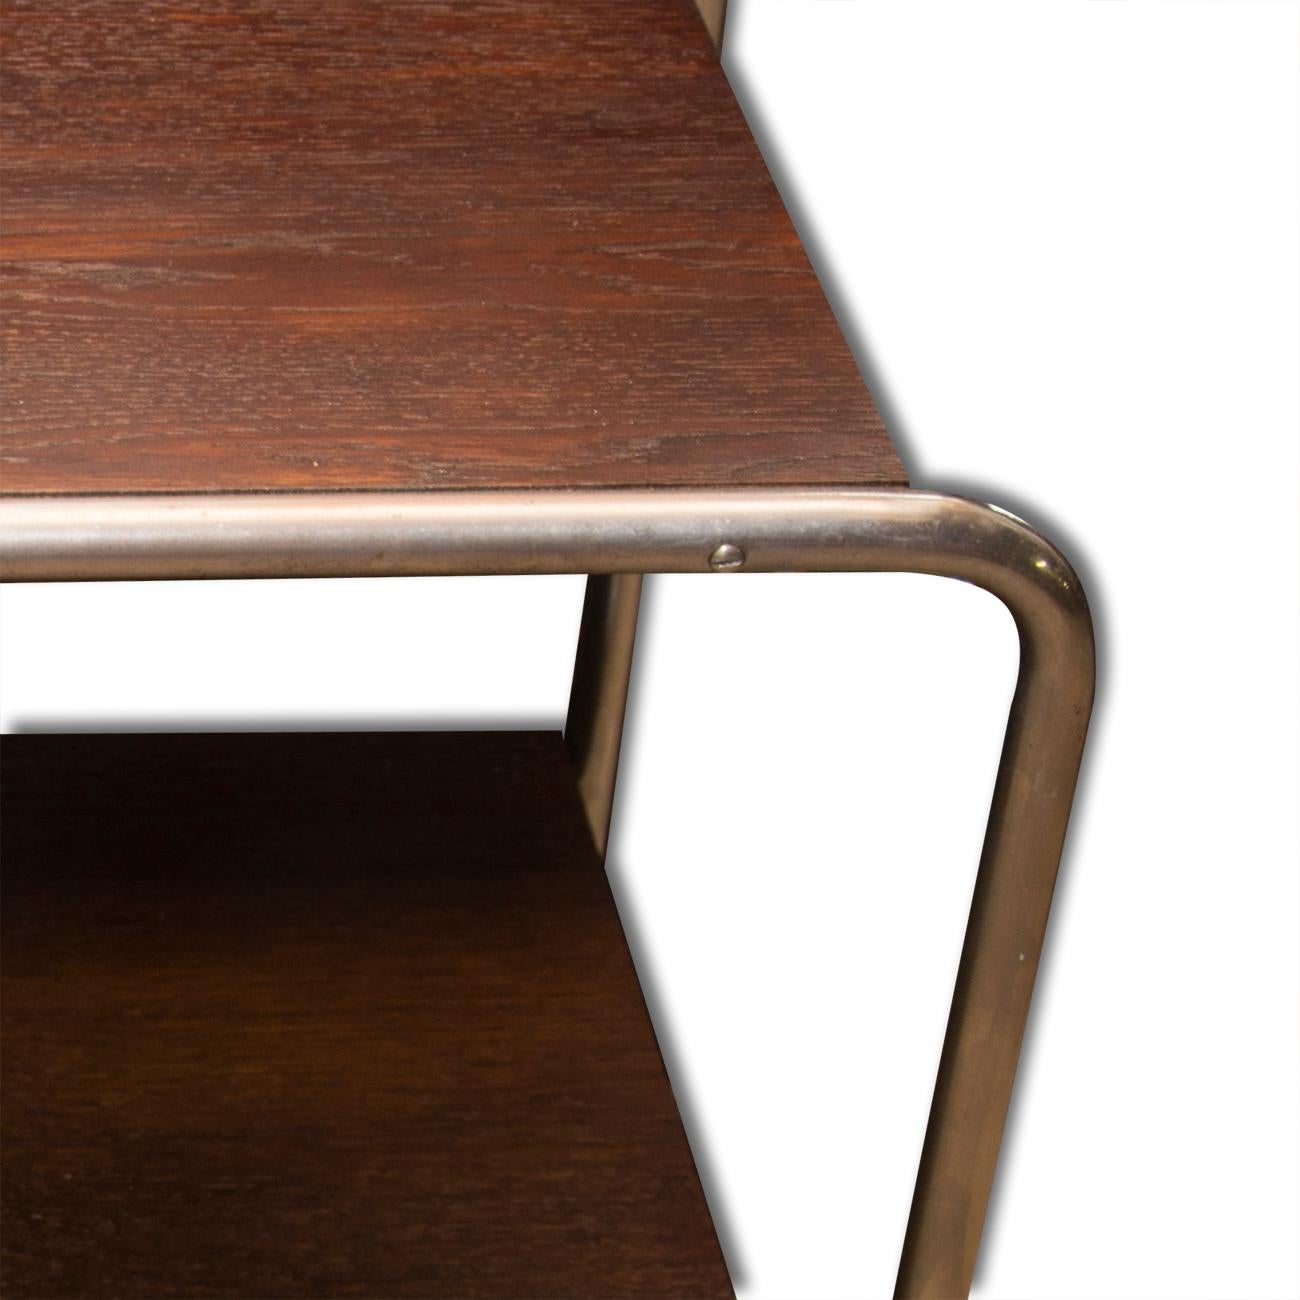 Wood Bauhause Side Table designed by Marcel Breuer, 1930s